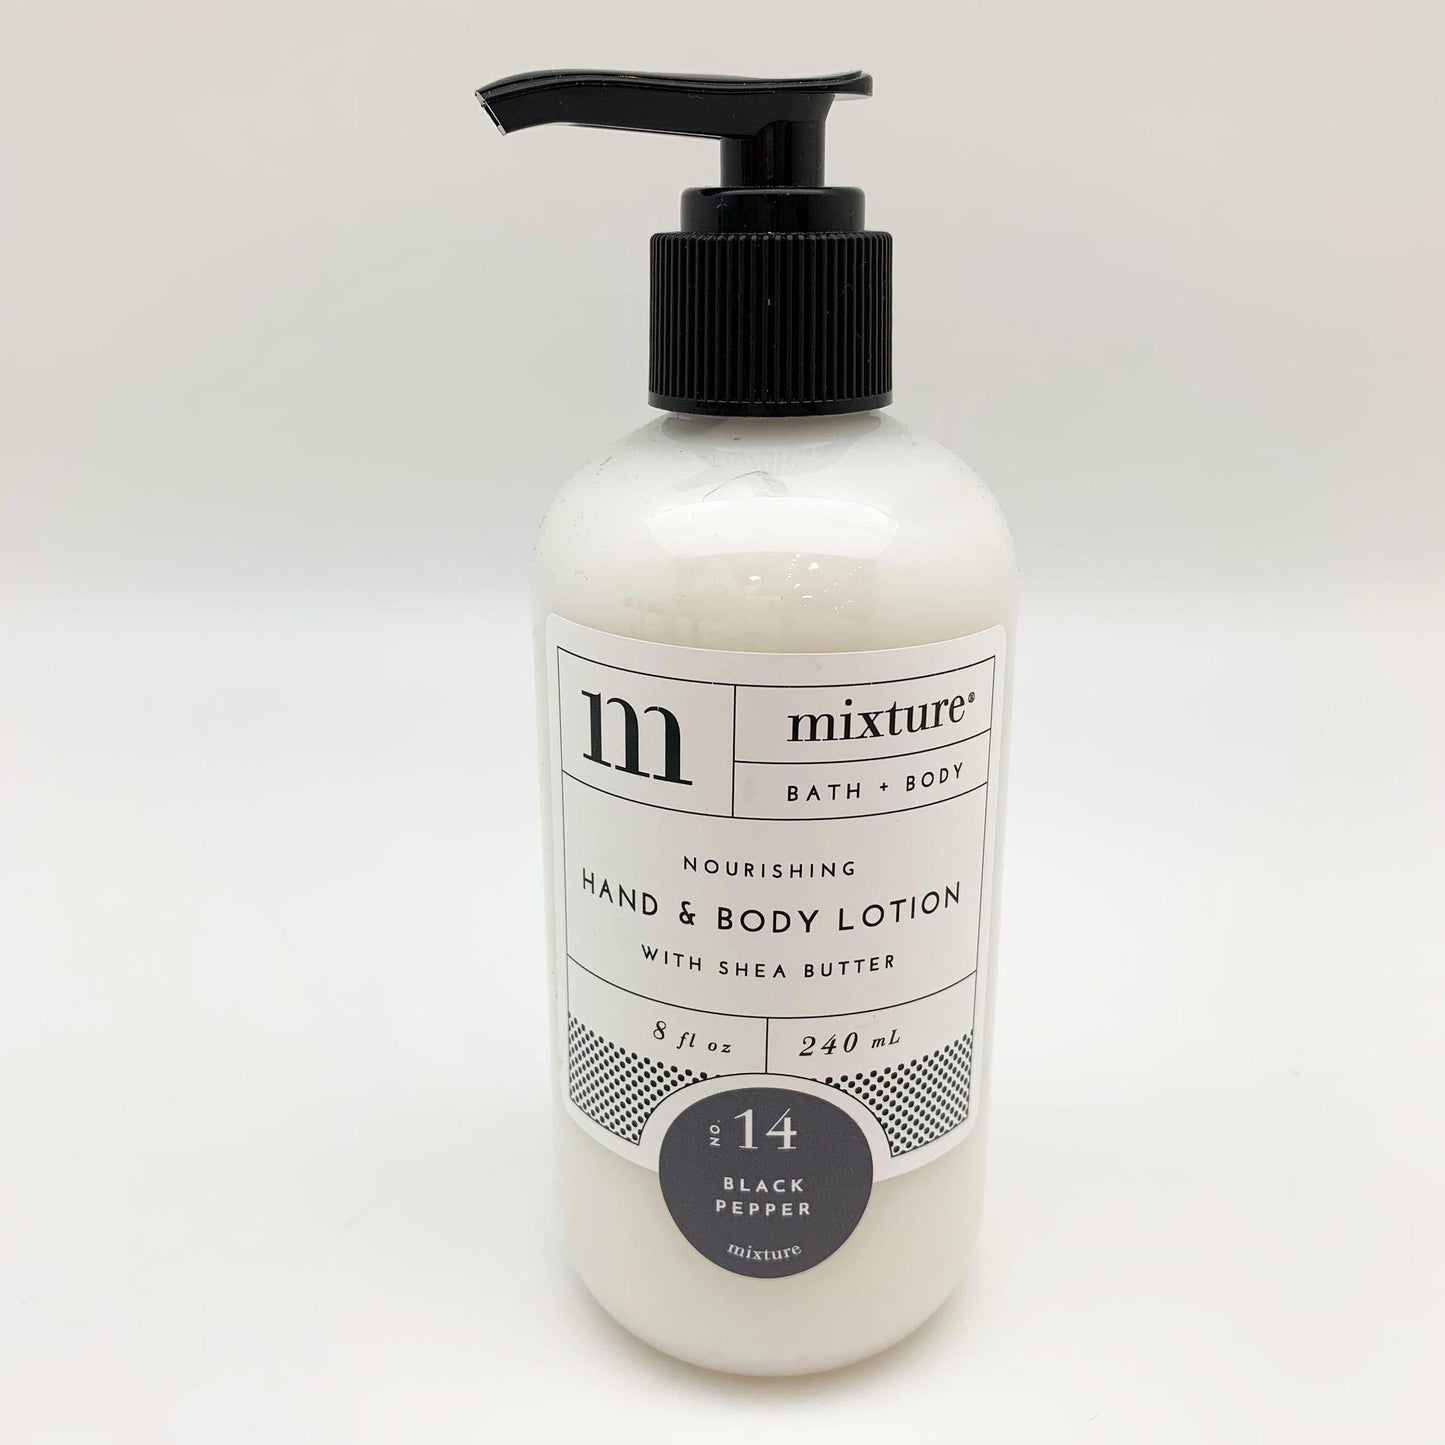 Hand Lotion - Black Pepper - 8 oz with Pump